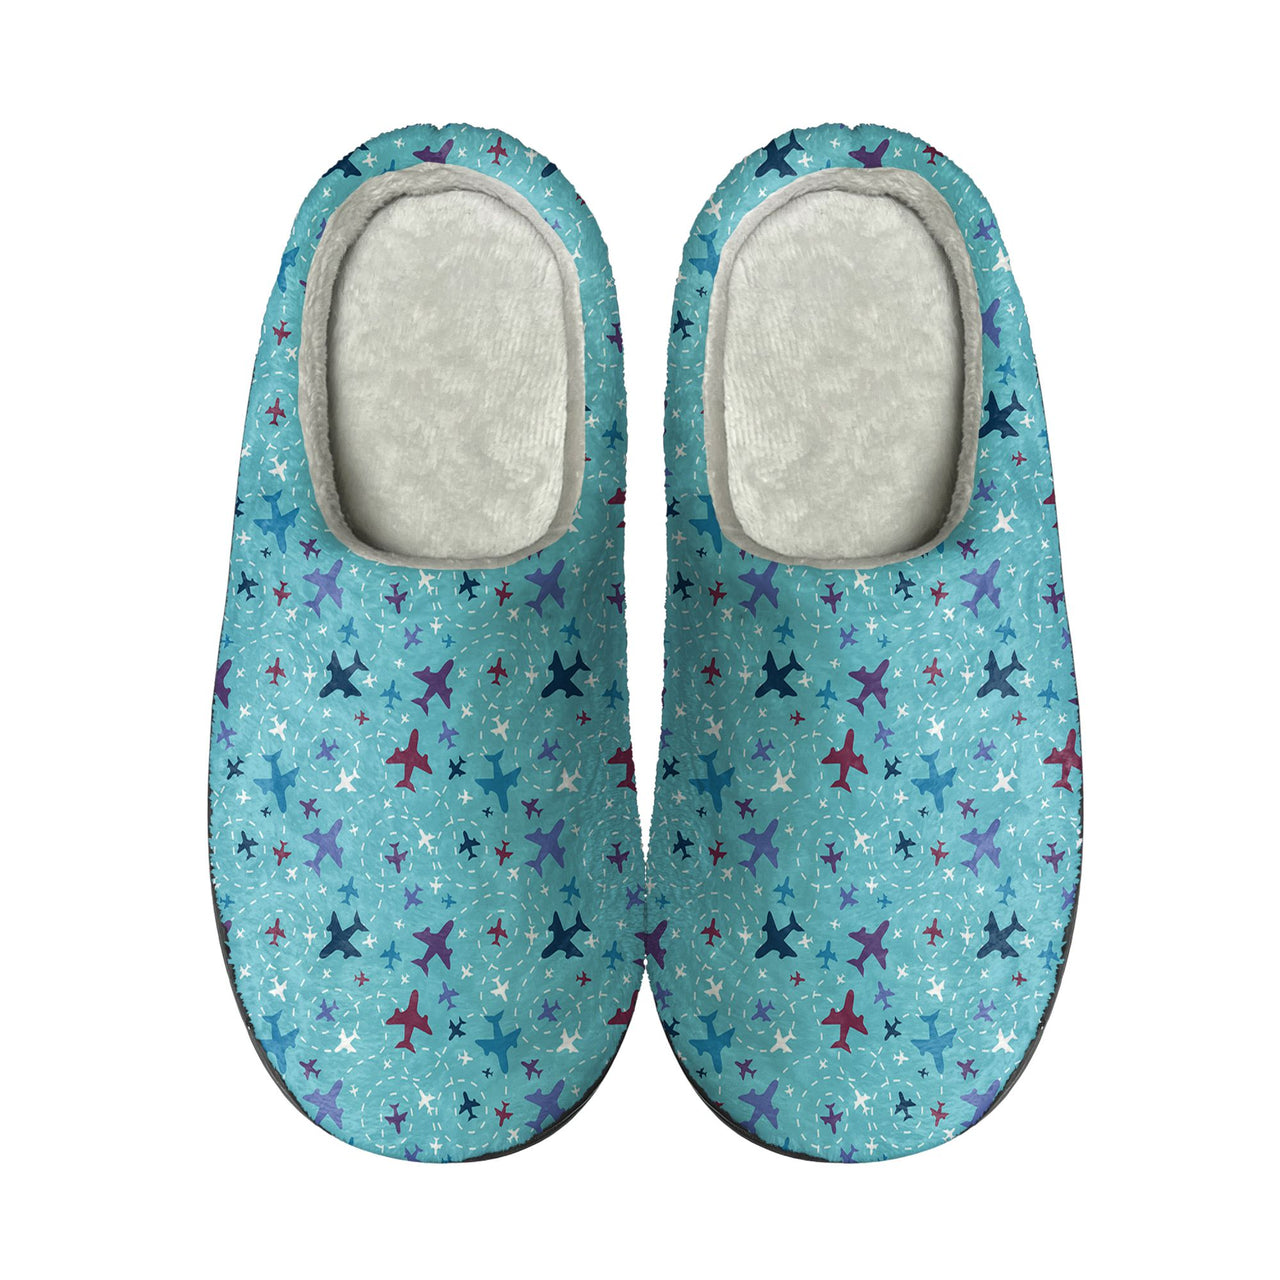 Love of Travel with Aircraft Designed Cotton Slippers